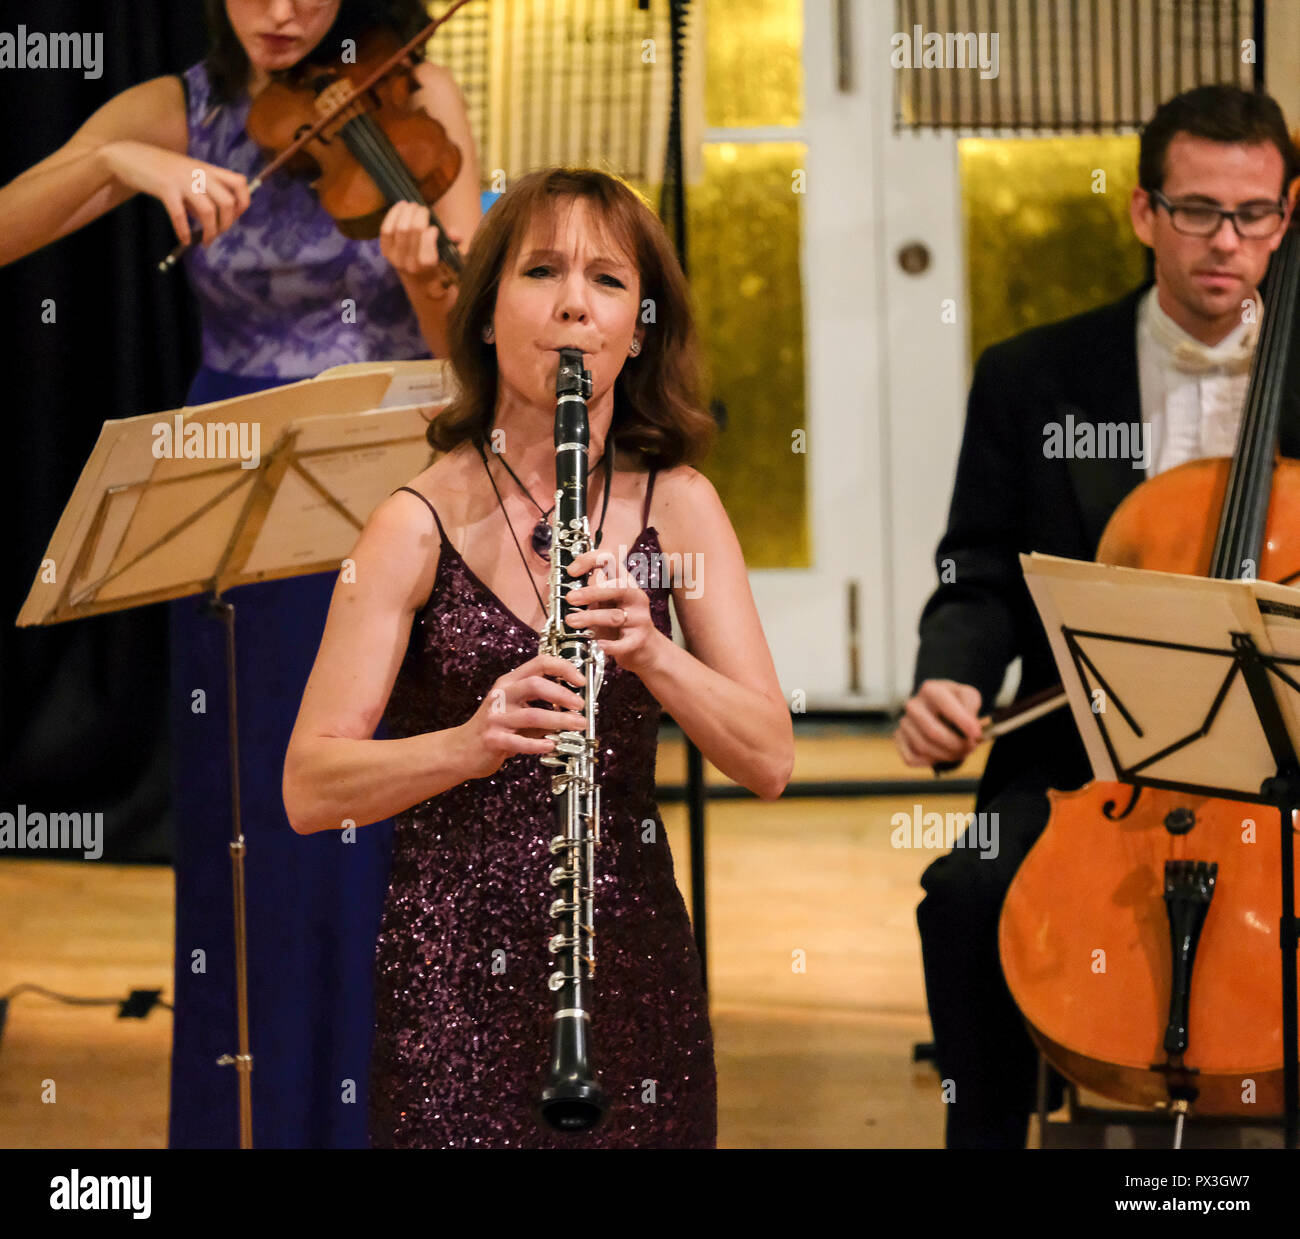 Stroud Subscription Rooms Gloucestershire, UK. 18th October, 2018. Emma Johnson...performing with European Union Chamber Orchestra at Stroud Subscription Rooms Gloucestershire performing Mozart's Clarinet Concerto.. Credit: charlie bryan/Alamy Live News Stock Photo